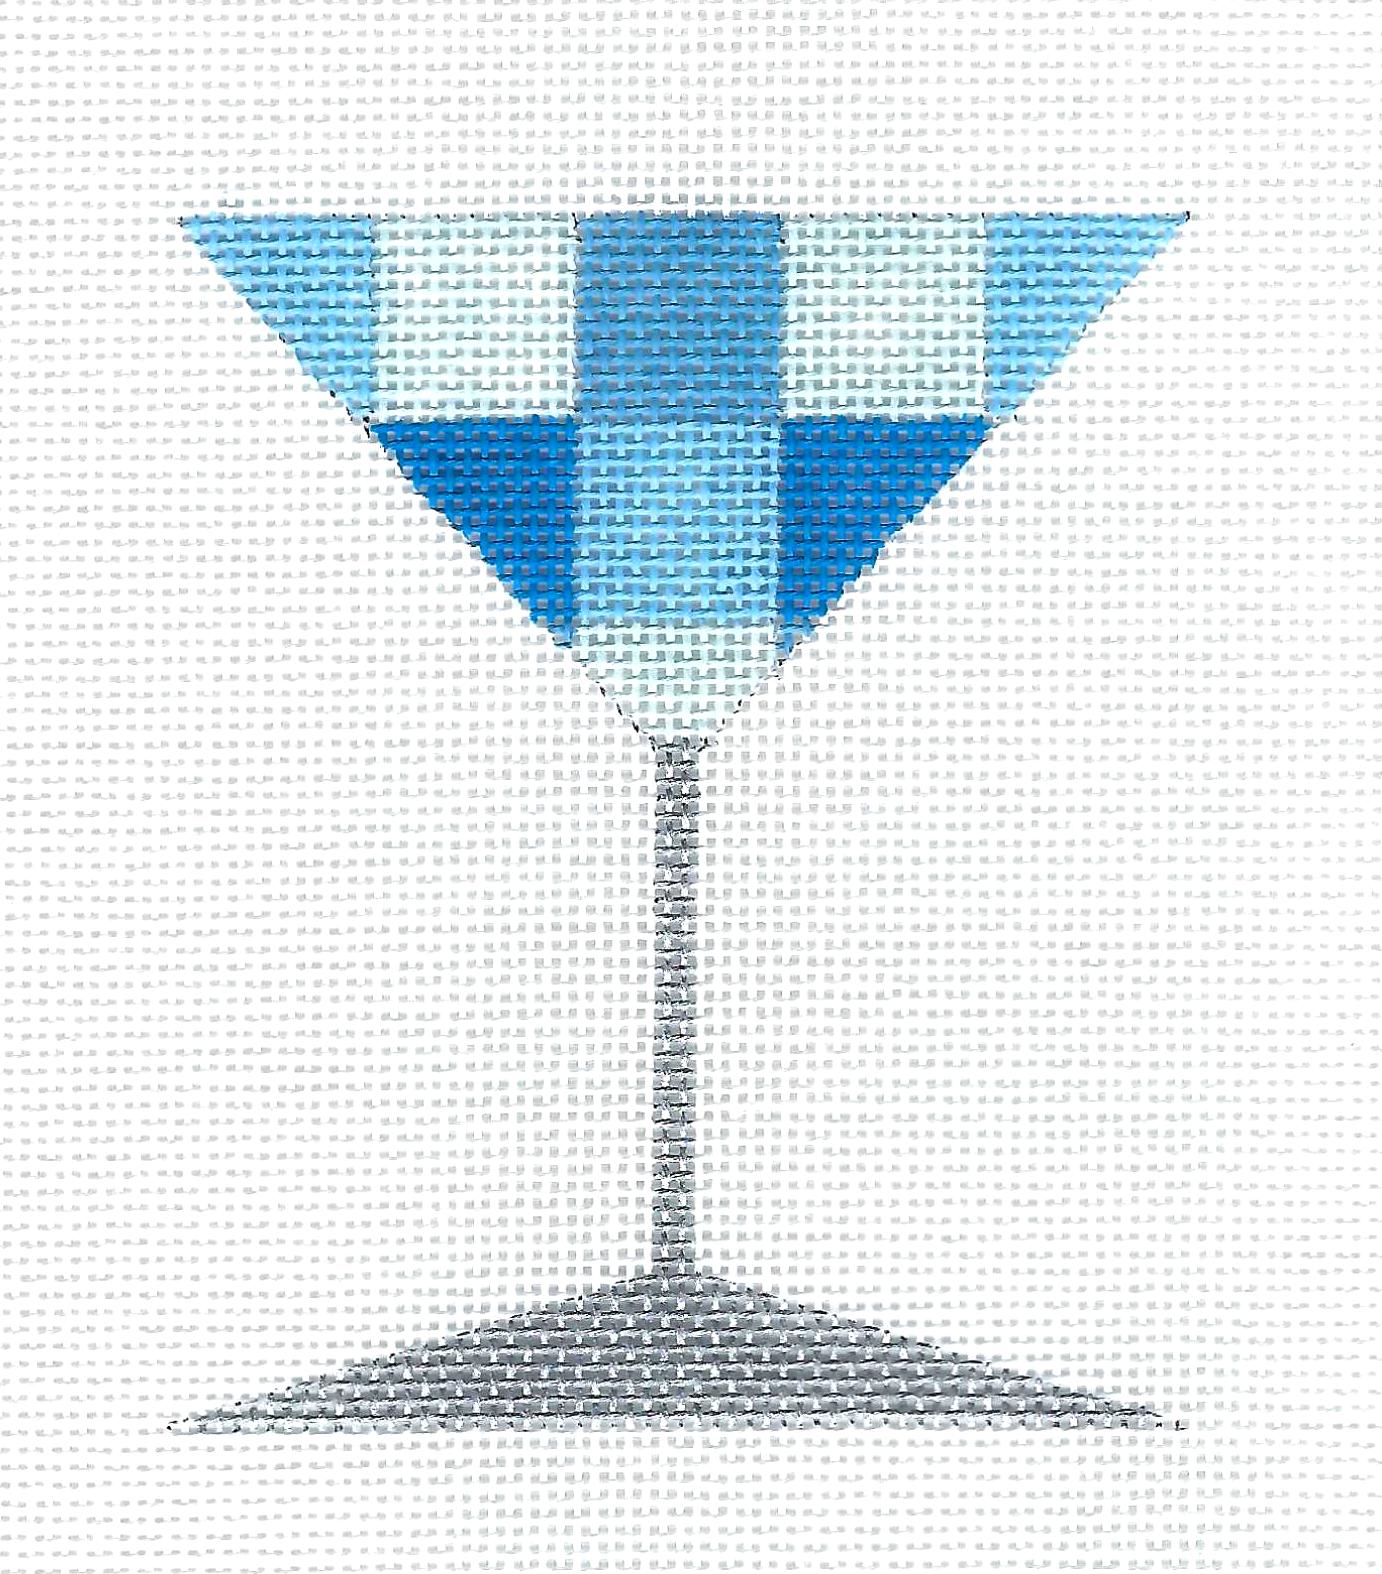 Blue Checked Martini Drink Glass handpainted Needlepoint Canvas by Raymond Crawford